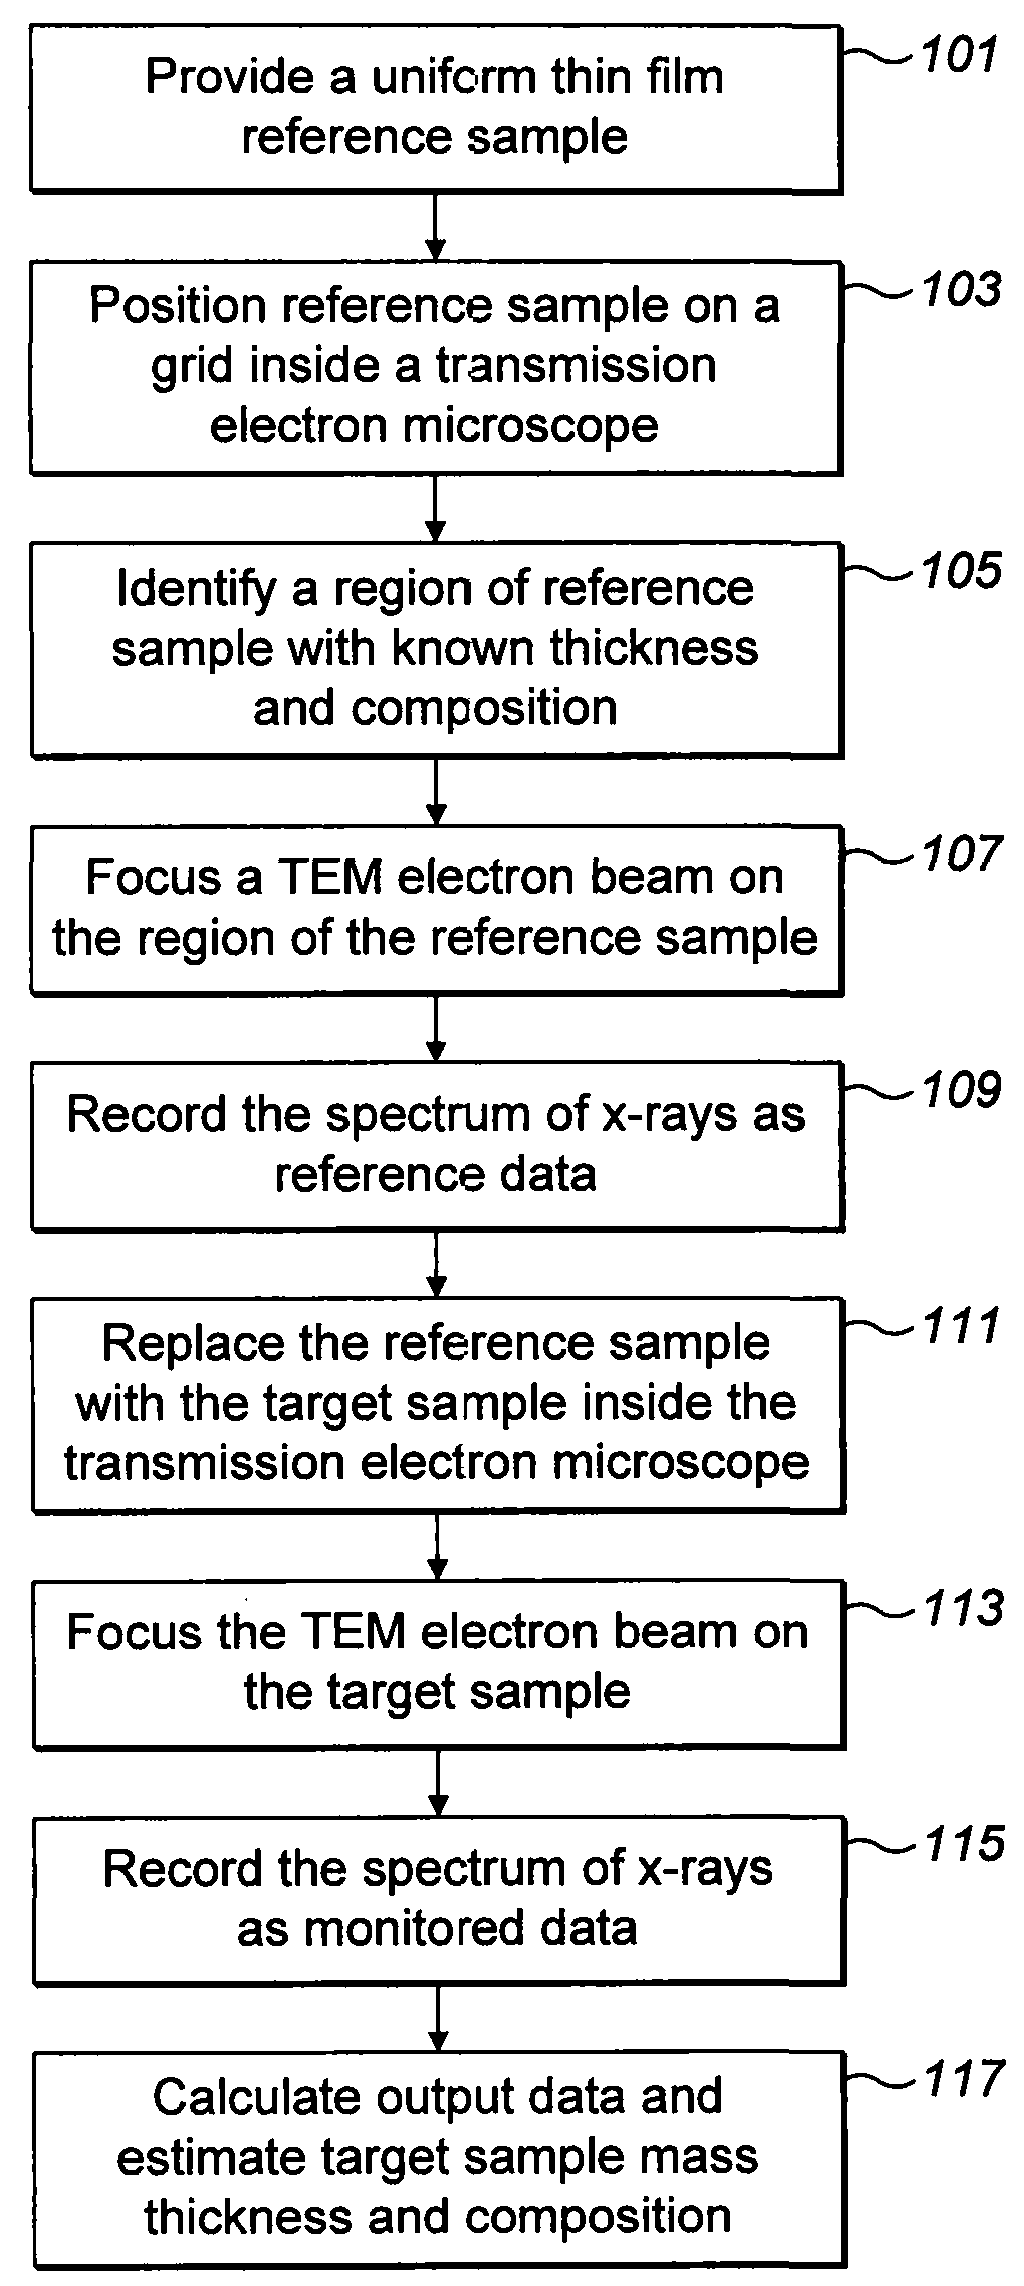 A method for measuring the mass thickness of a target sample for electron microscopy